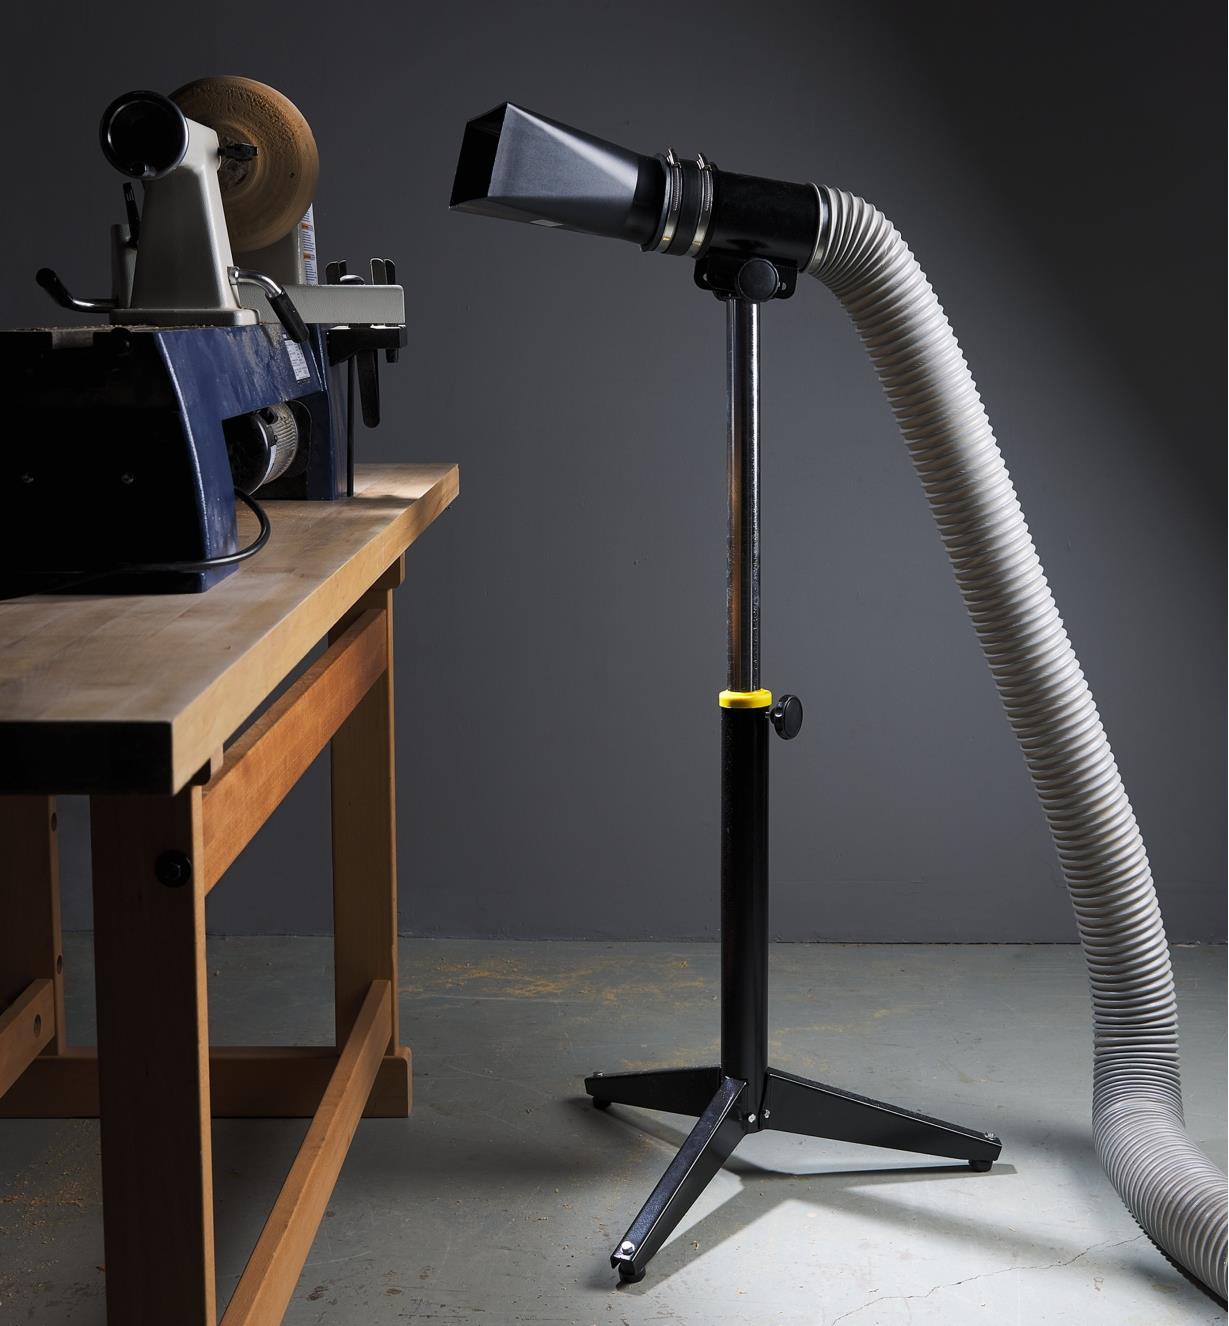 A stand with a dust hood connected to a hose next to a workbench and lathe